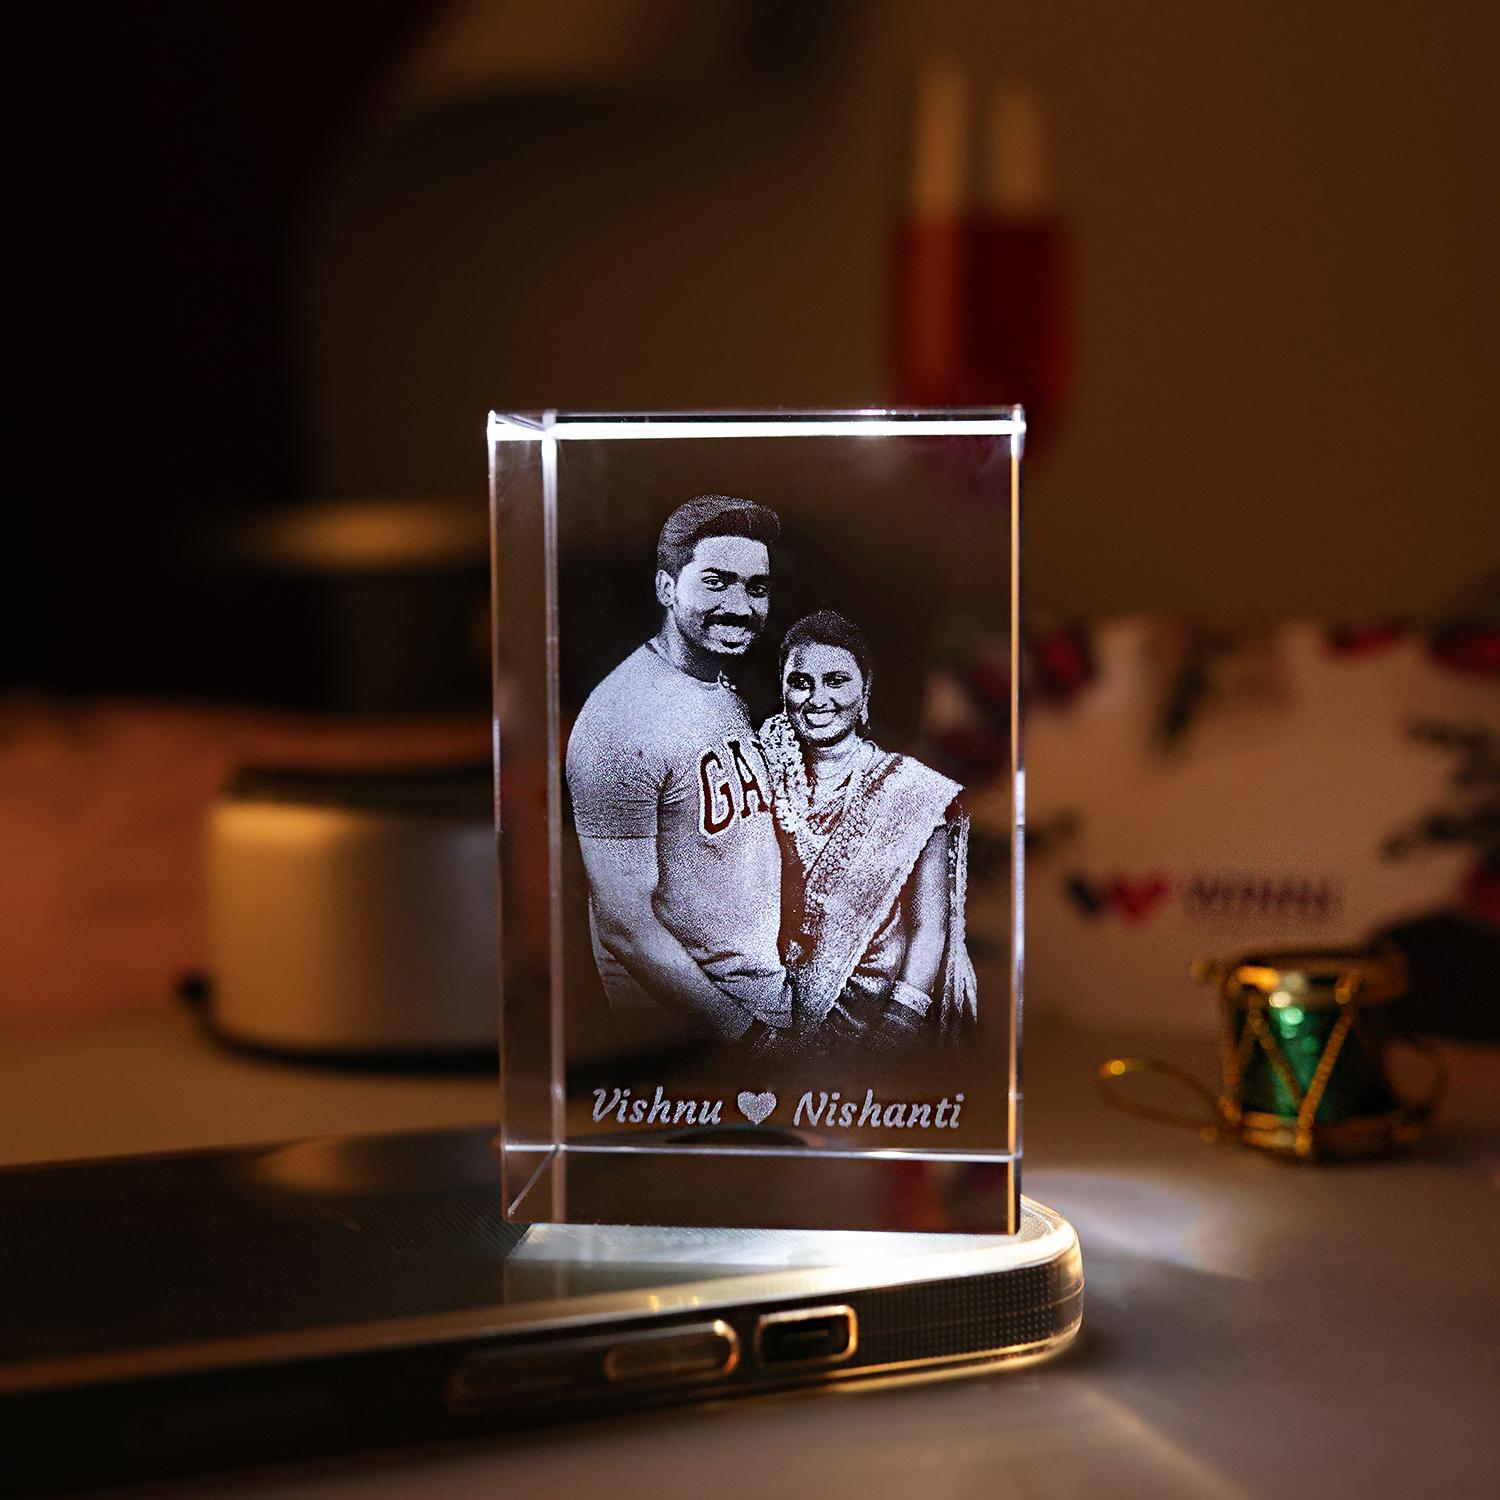 Best 3rd Crystal/Glass Anniversary Gifts for Him | Anniversary gifts for him,  Anniversary gifts, Anniversary glass